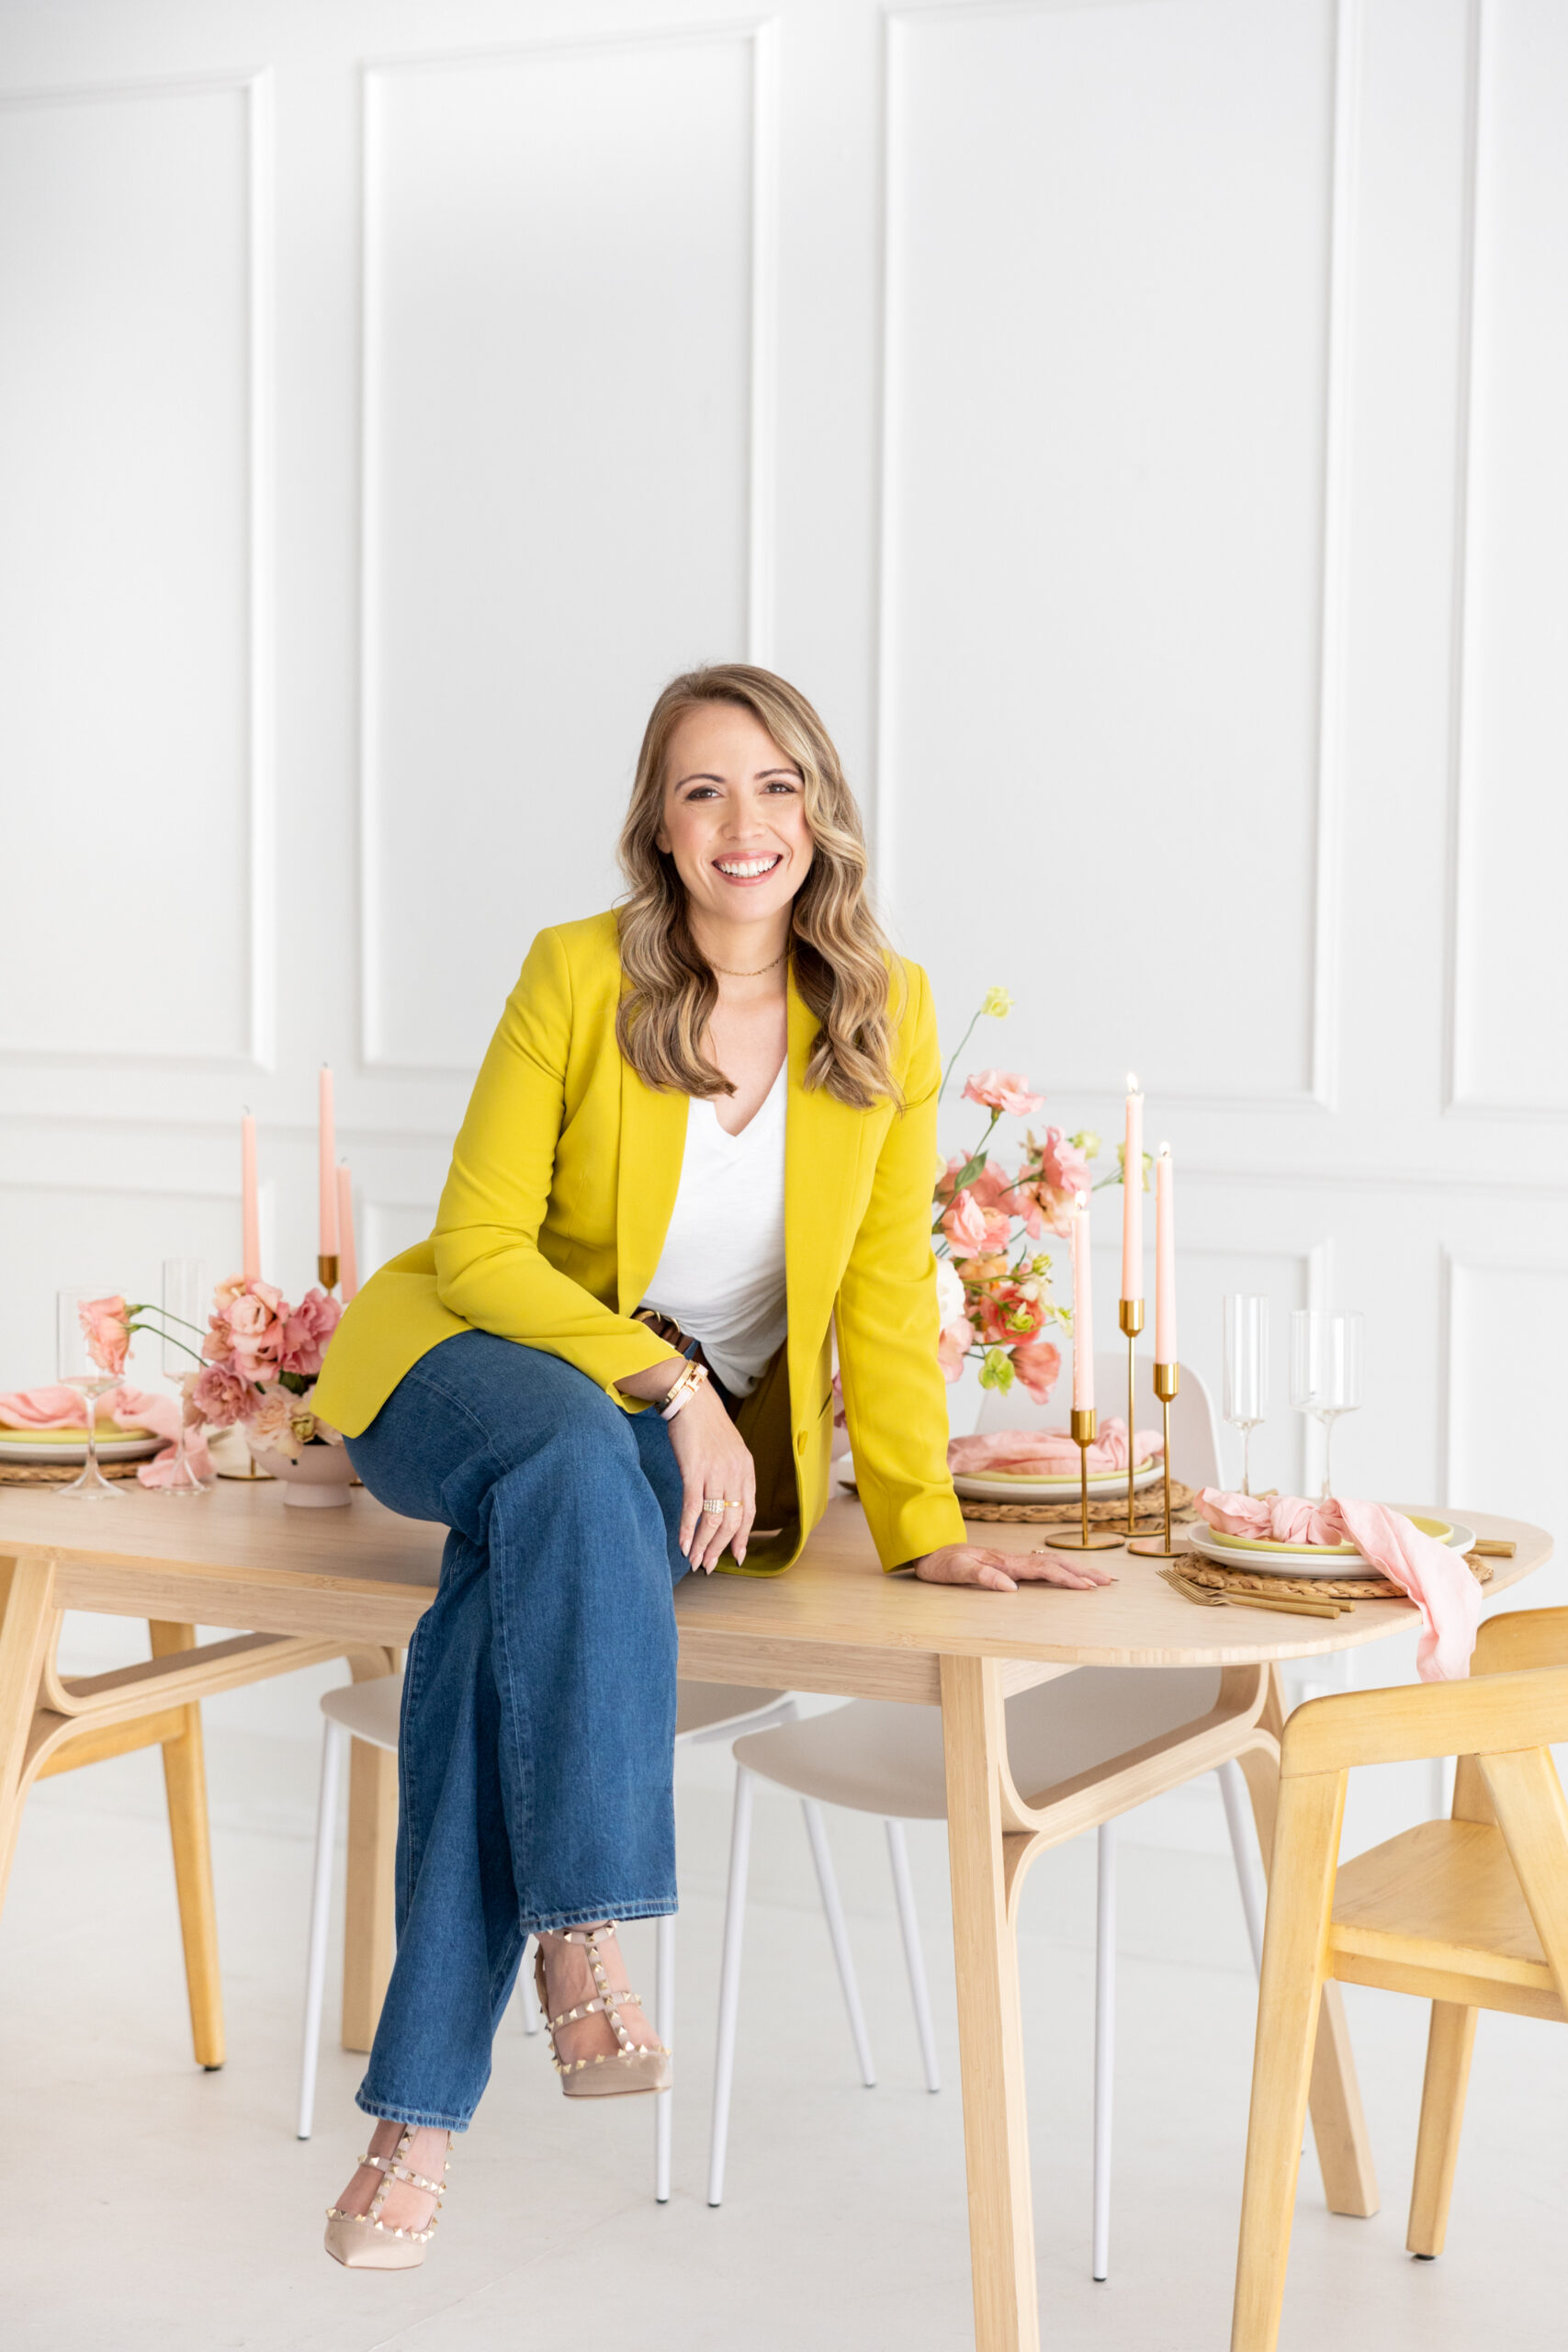 A woman in a yellow jacket participating in a brand photoshoot as a wedding planner at a wooden table.